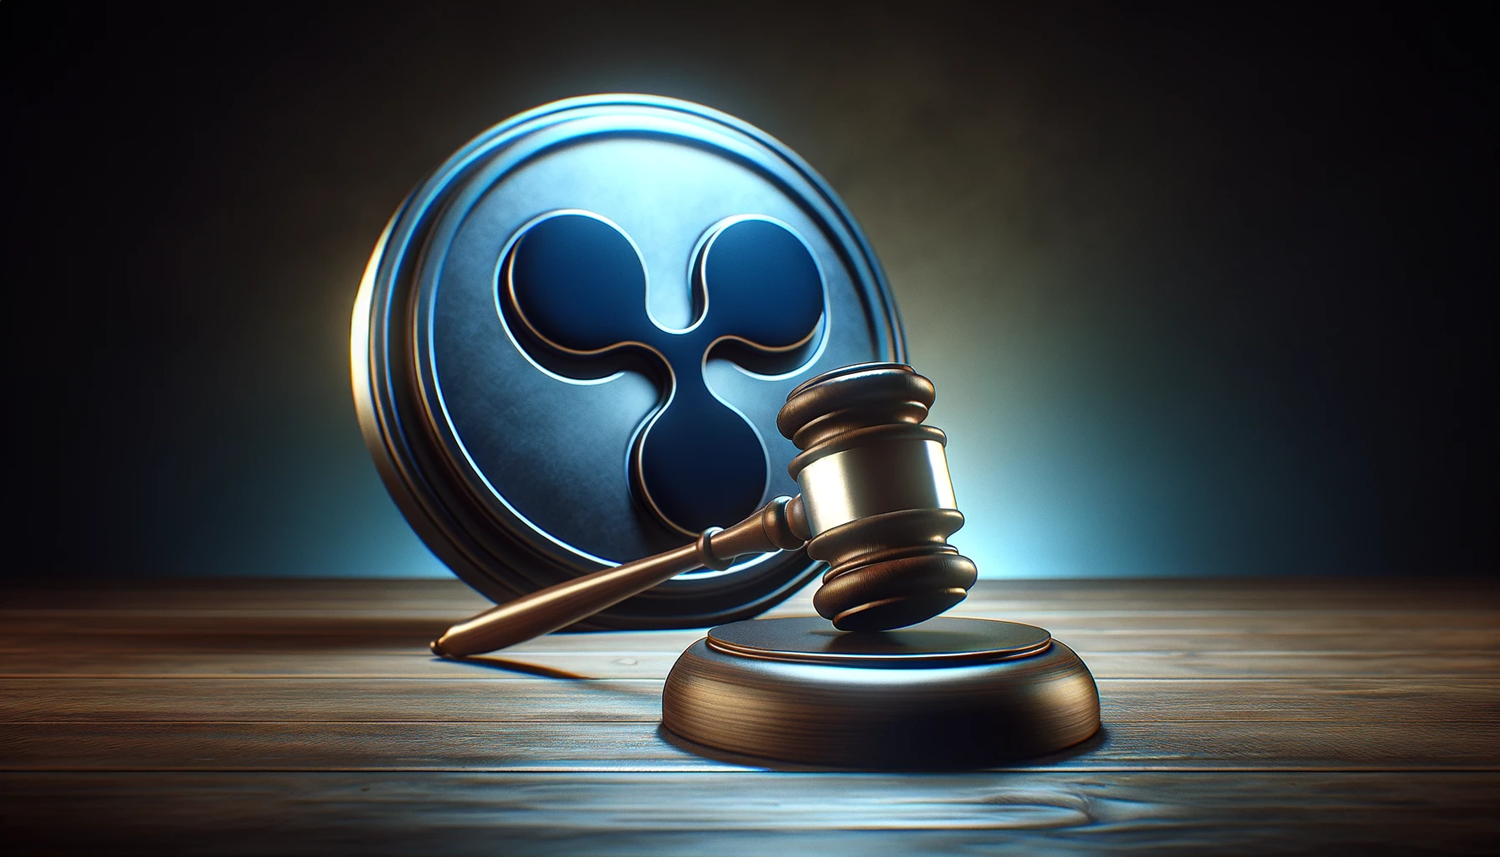 Ripple Case May End Without SEC Appeal, Ex-Official Suggests